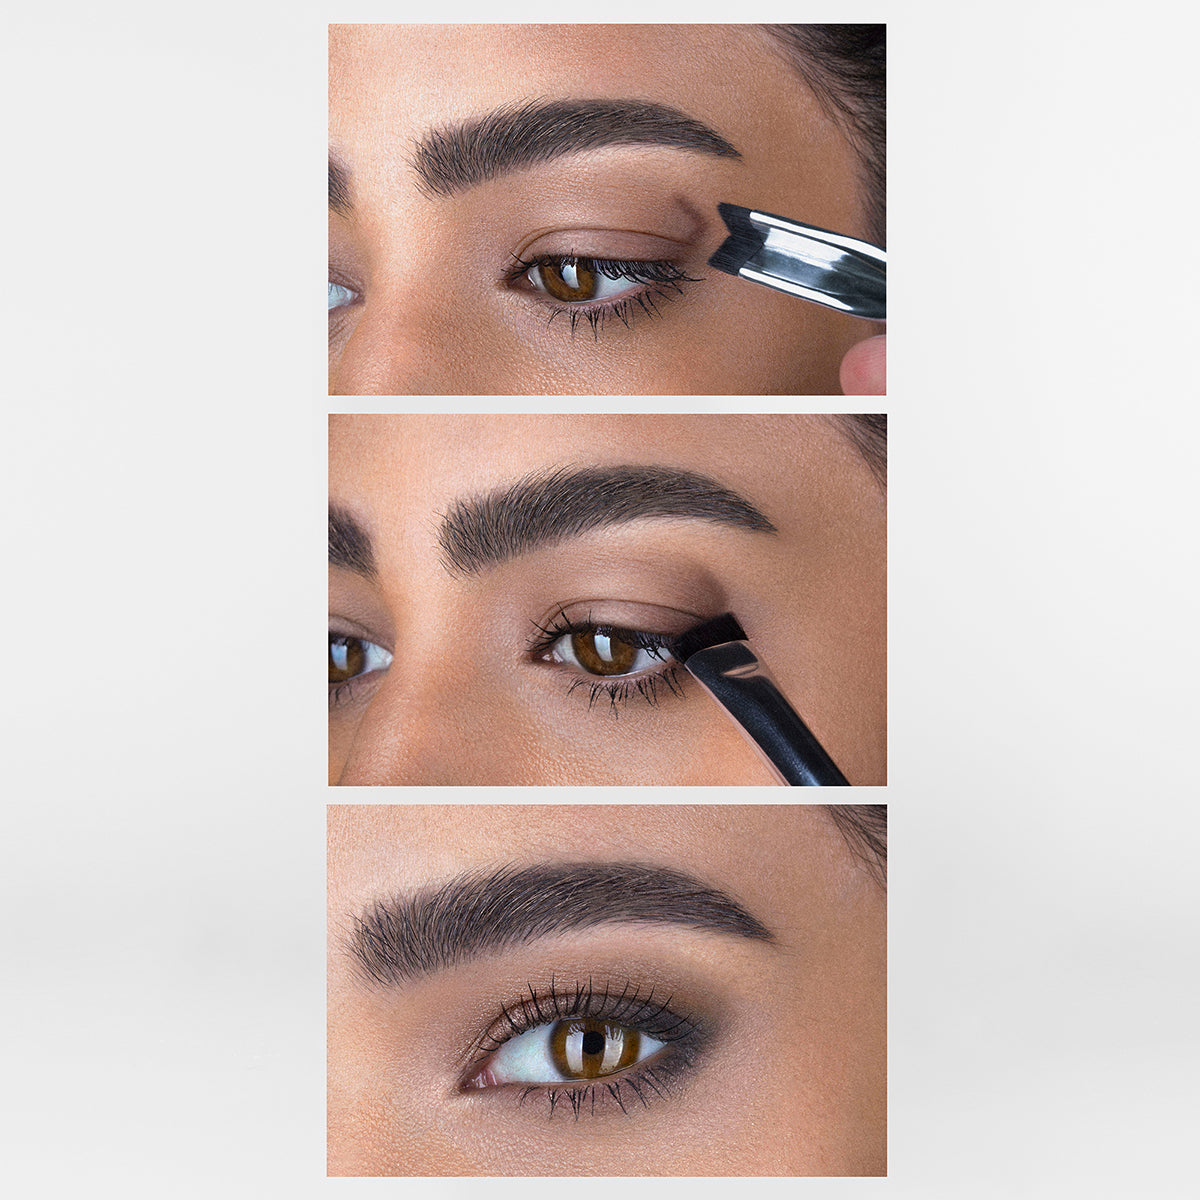 Demonstration of creating a perfect eyeshadow look using the v-shaped end of the corner brush eye stamper and the angled end